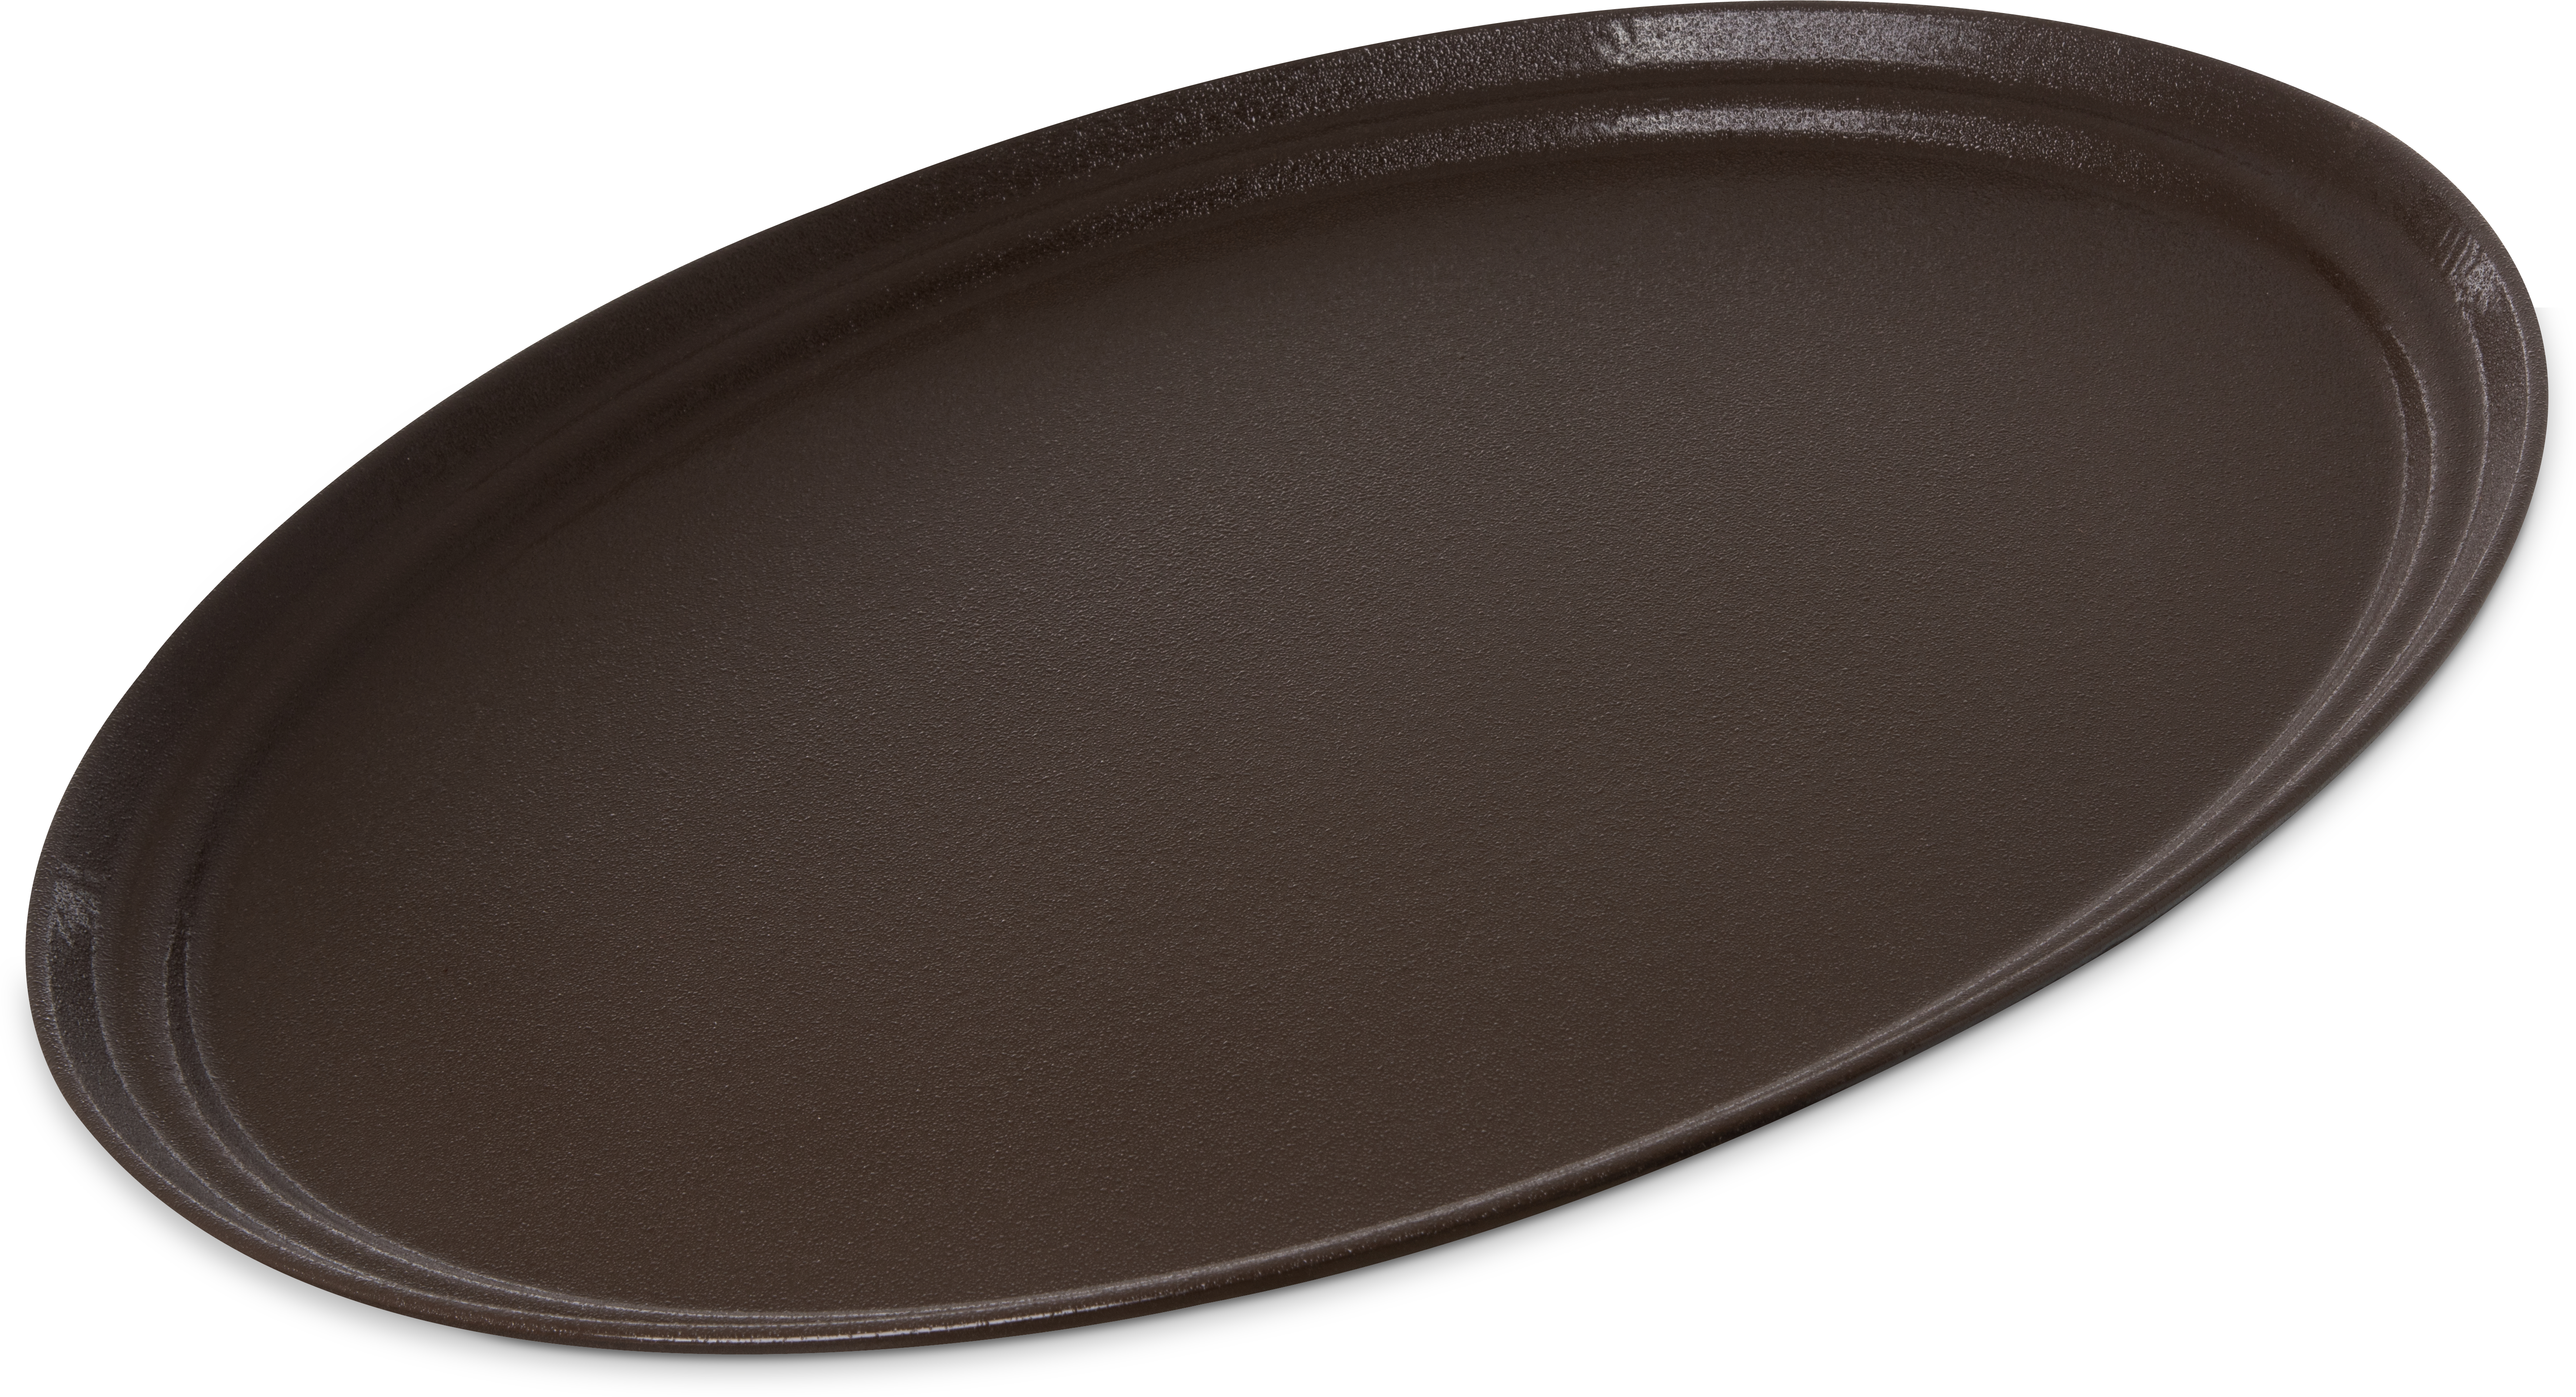 Griptite 2 Oval Tray 24 x 19 - Brown